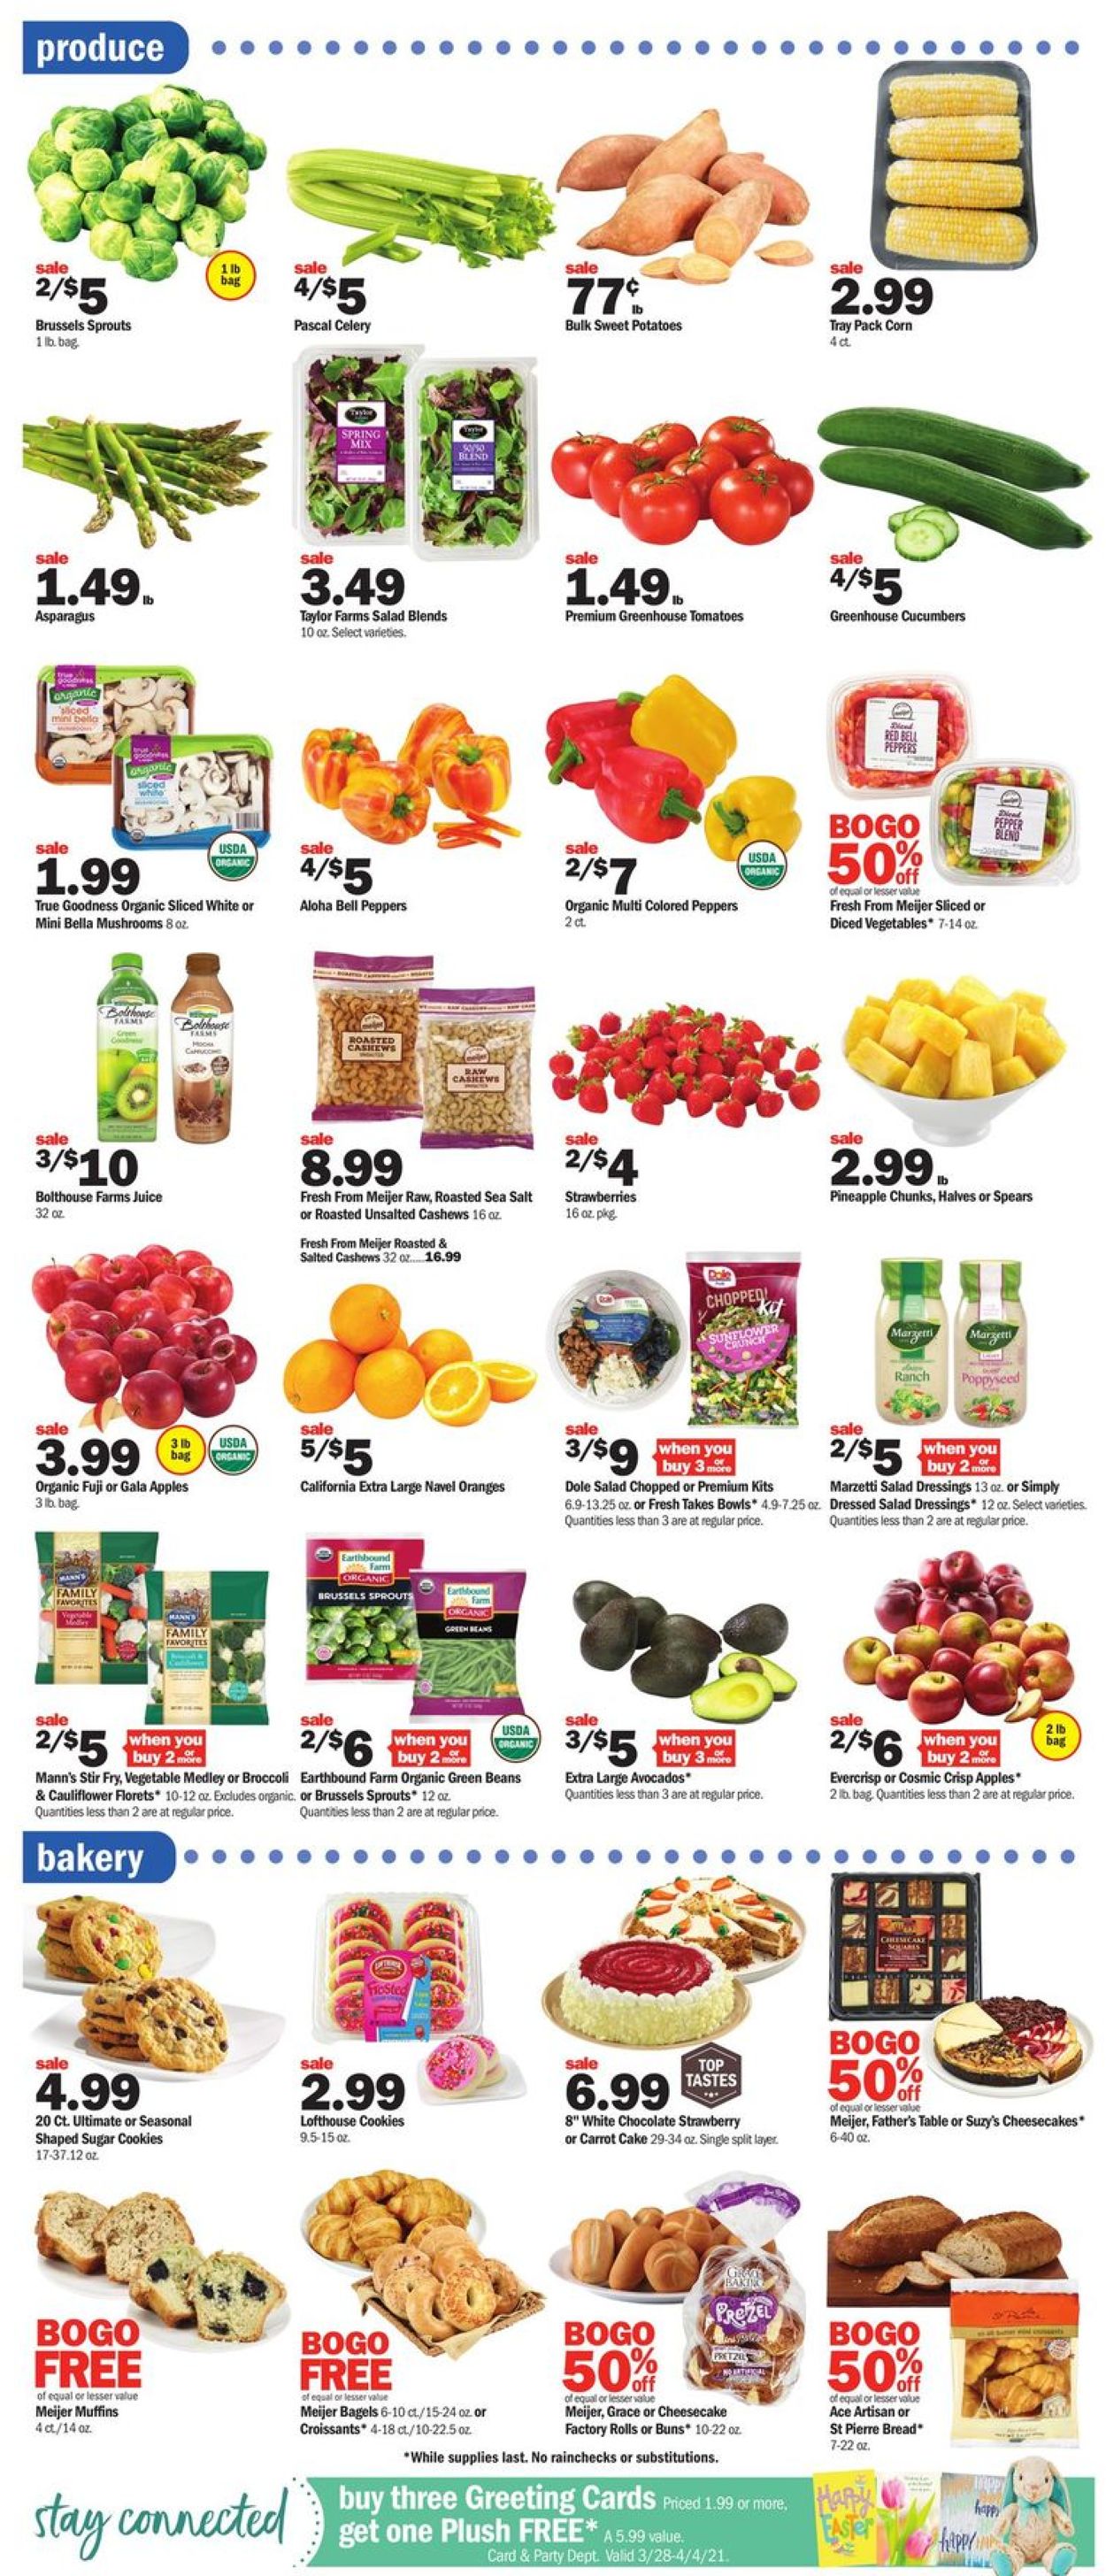 Catalogue Meijer - Easter 2021 ad from 03/28/2021